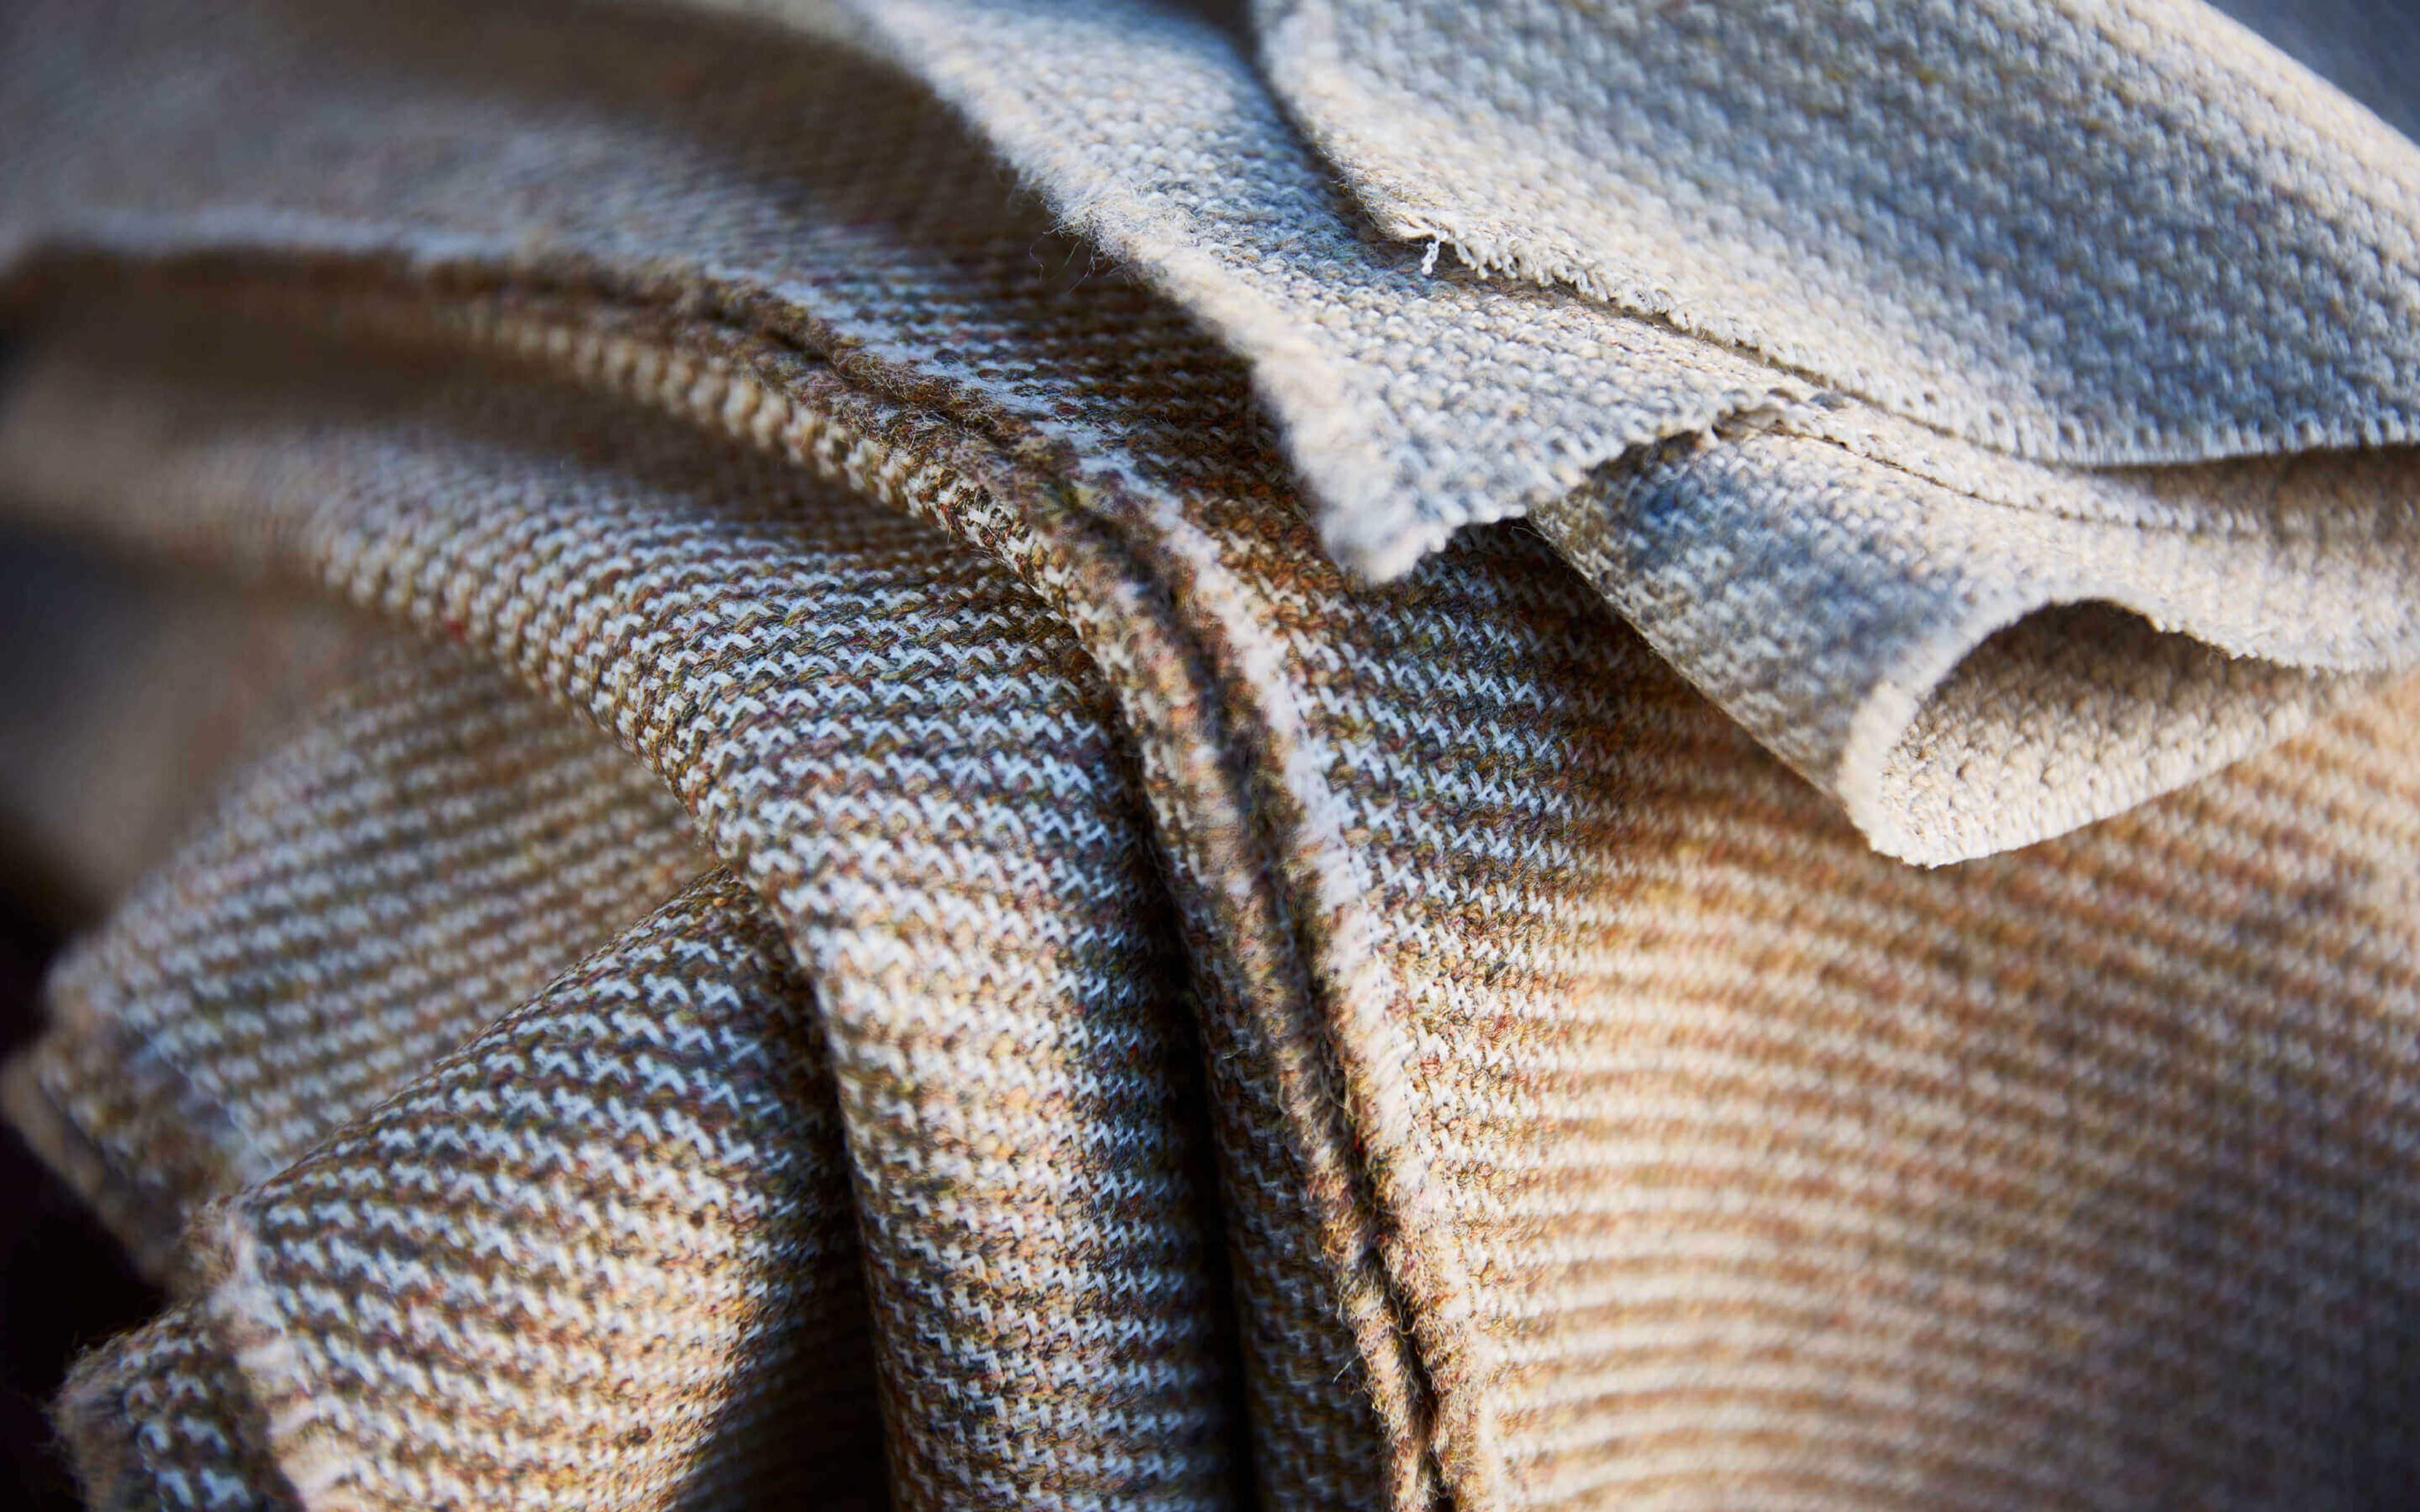 Revolutionary by Camira, a recycled wool fabric